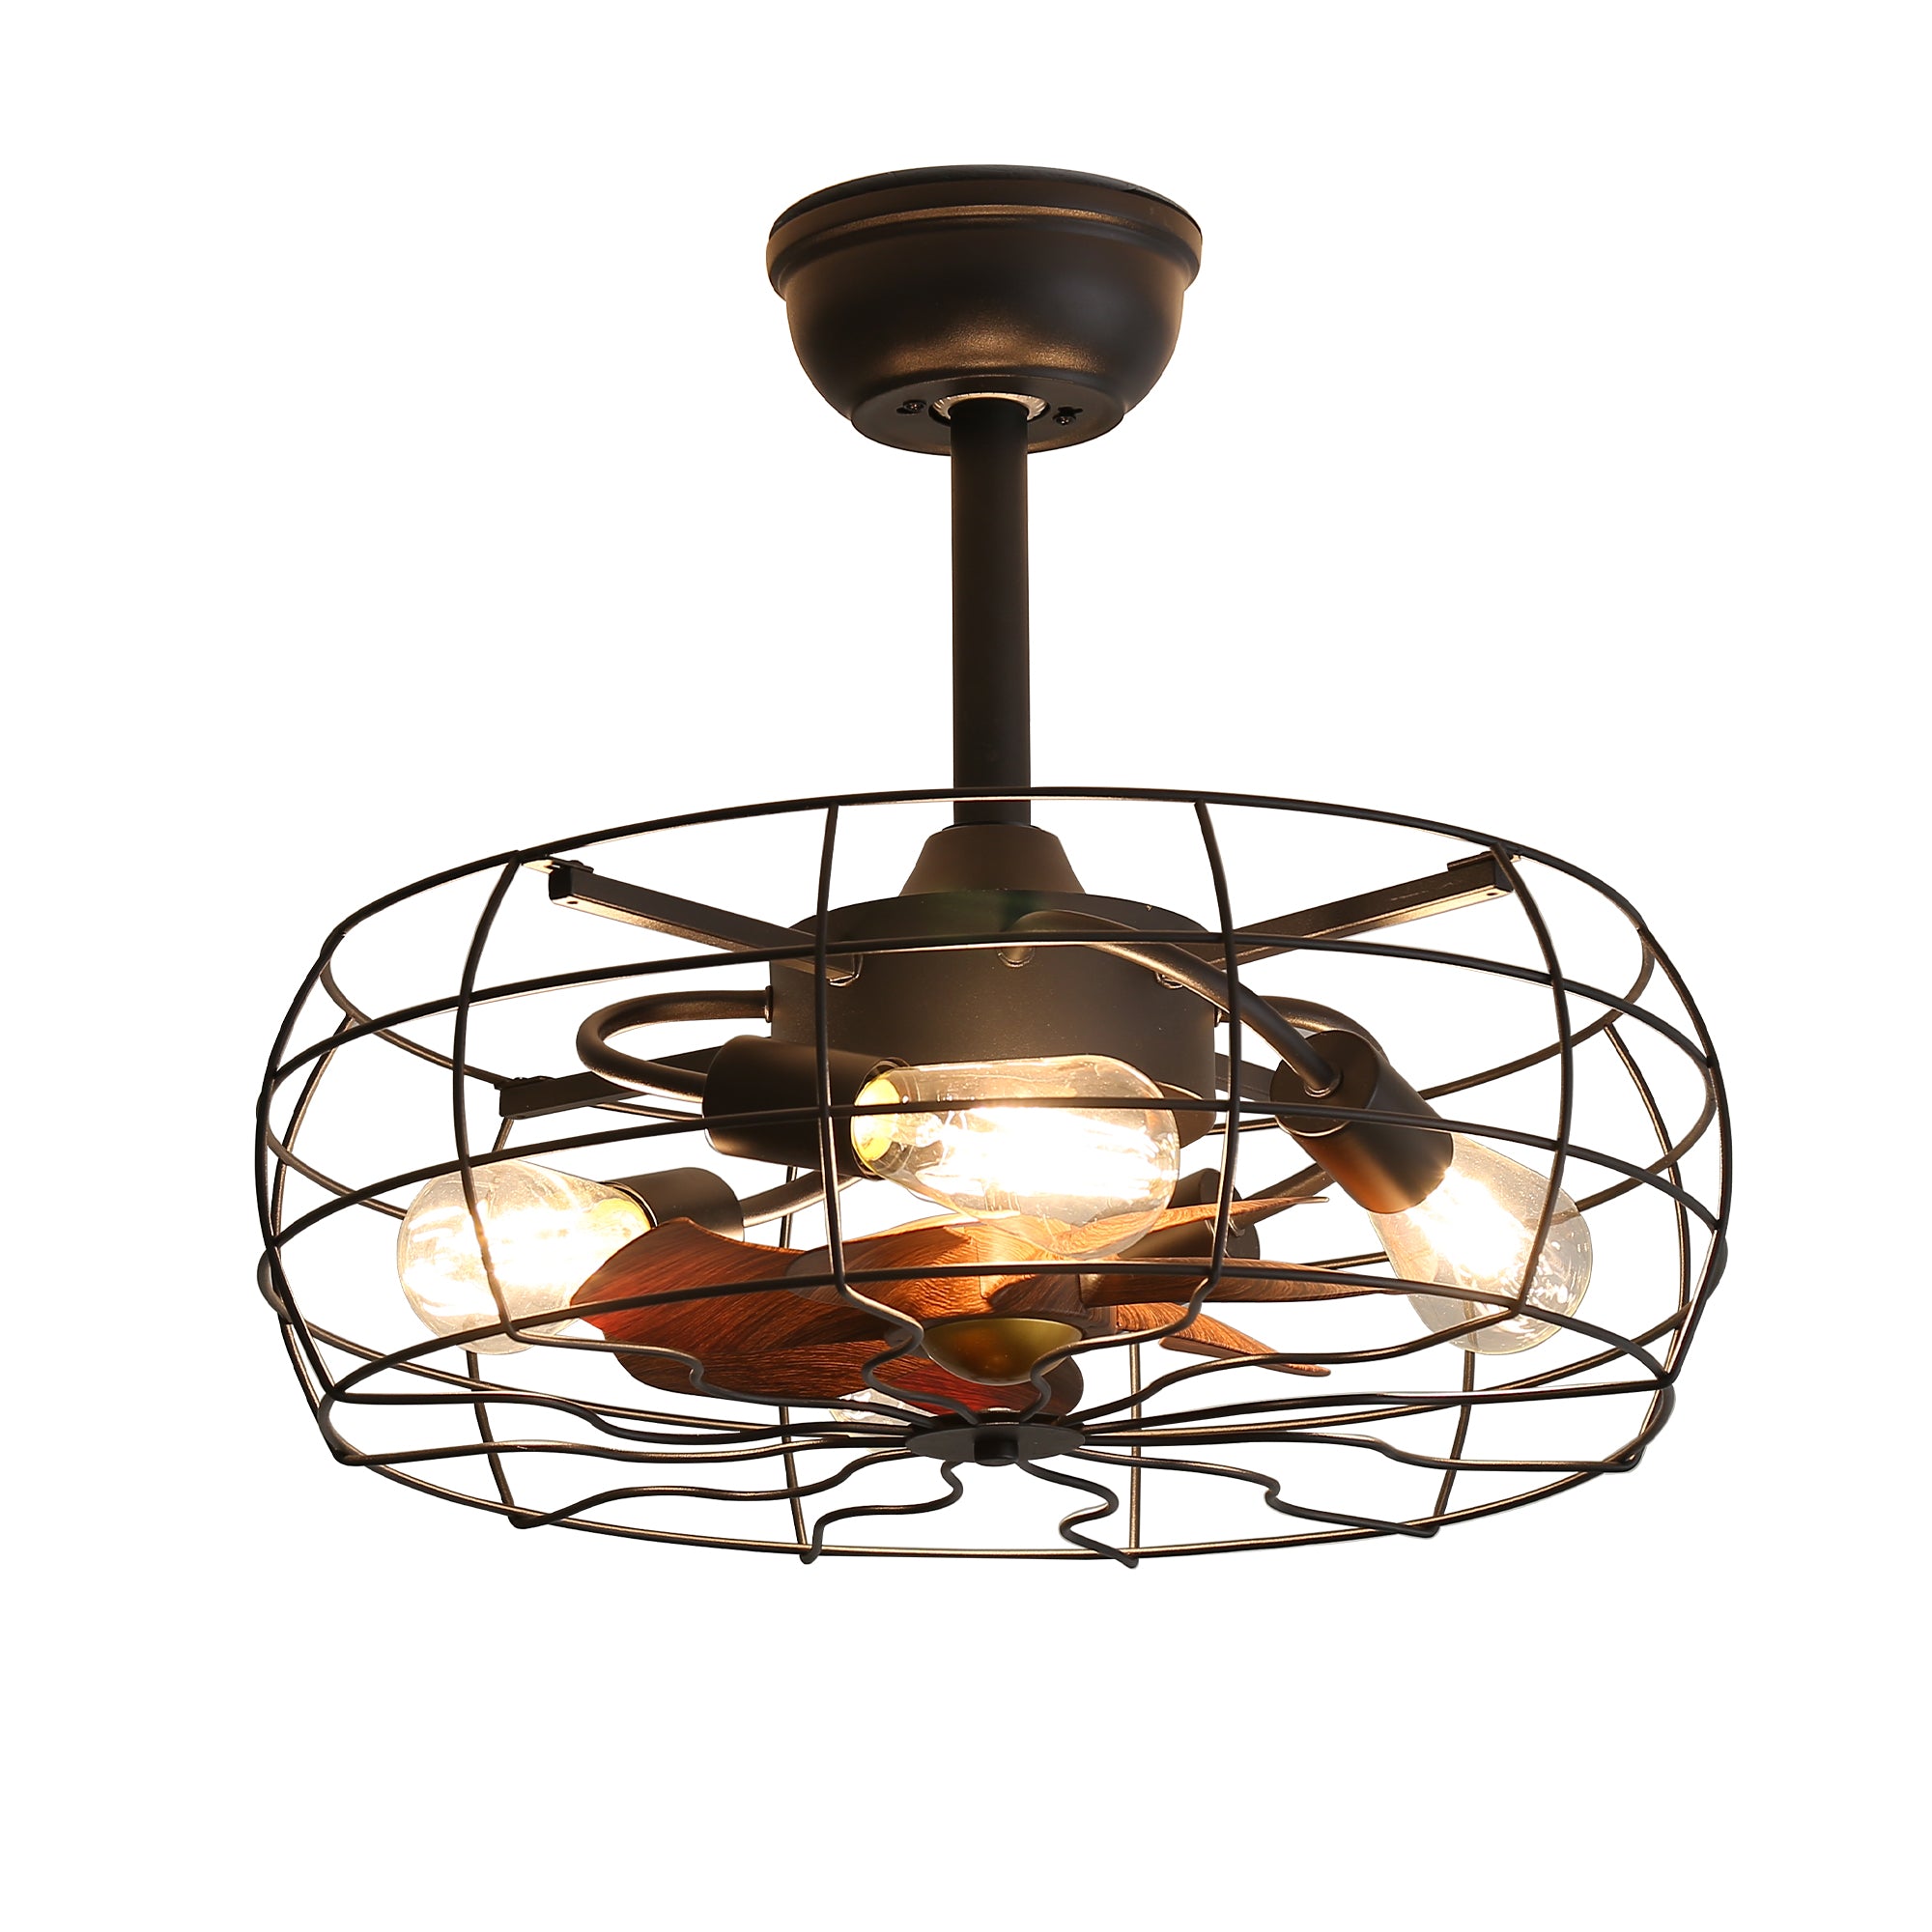 REYDELUZ 19" Caged Ceiling Fans with Lights Remote Control.